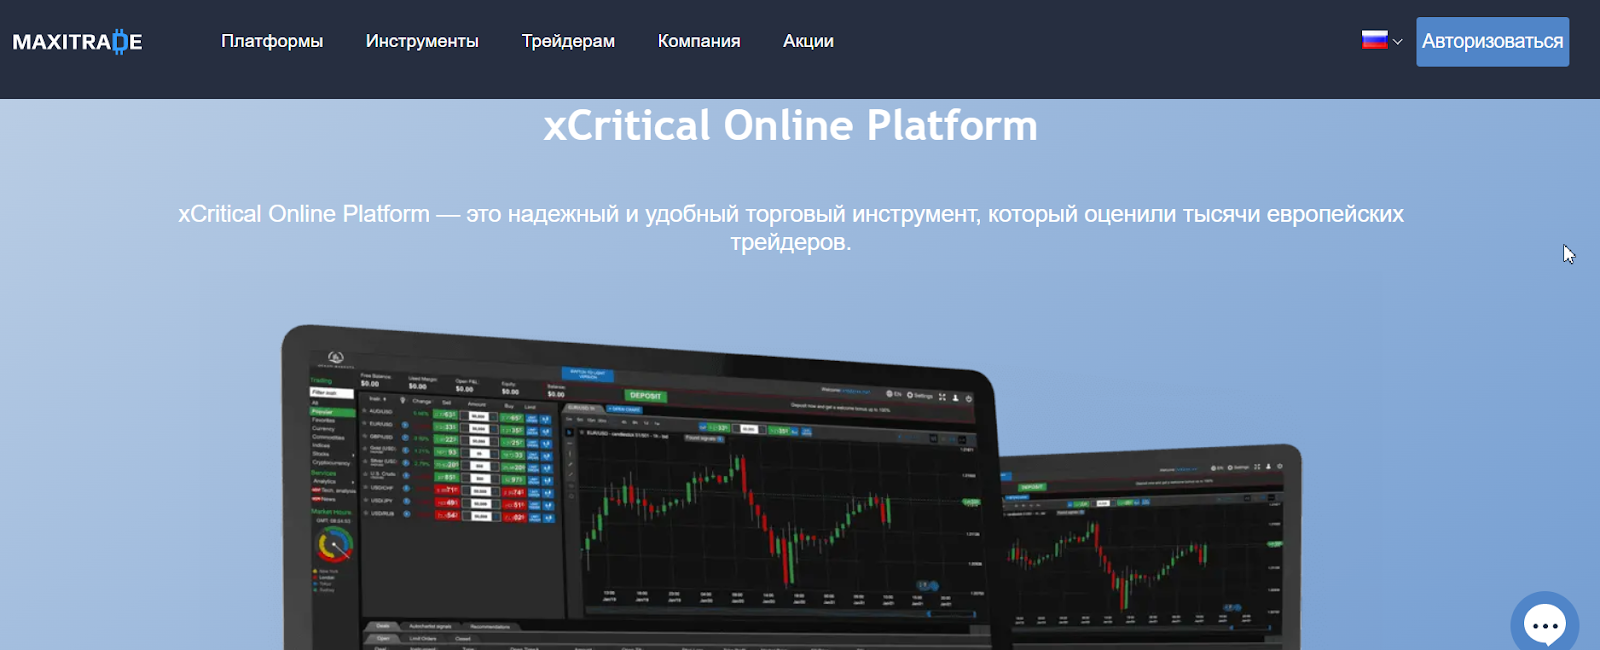 Review of MaxiTrade’s User Account — XCritical platform